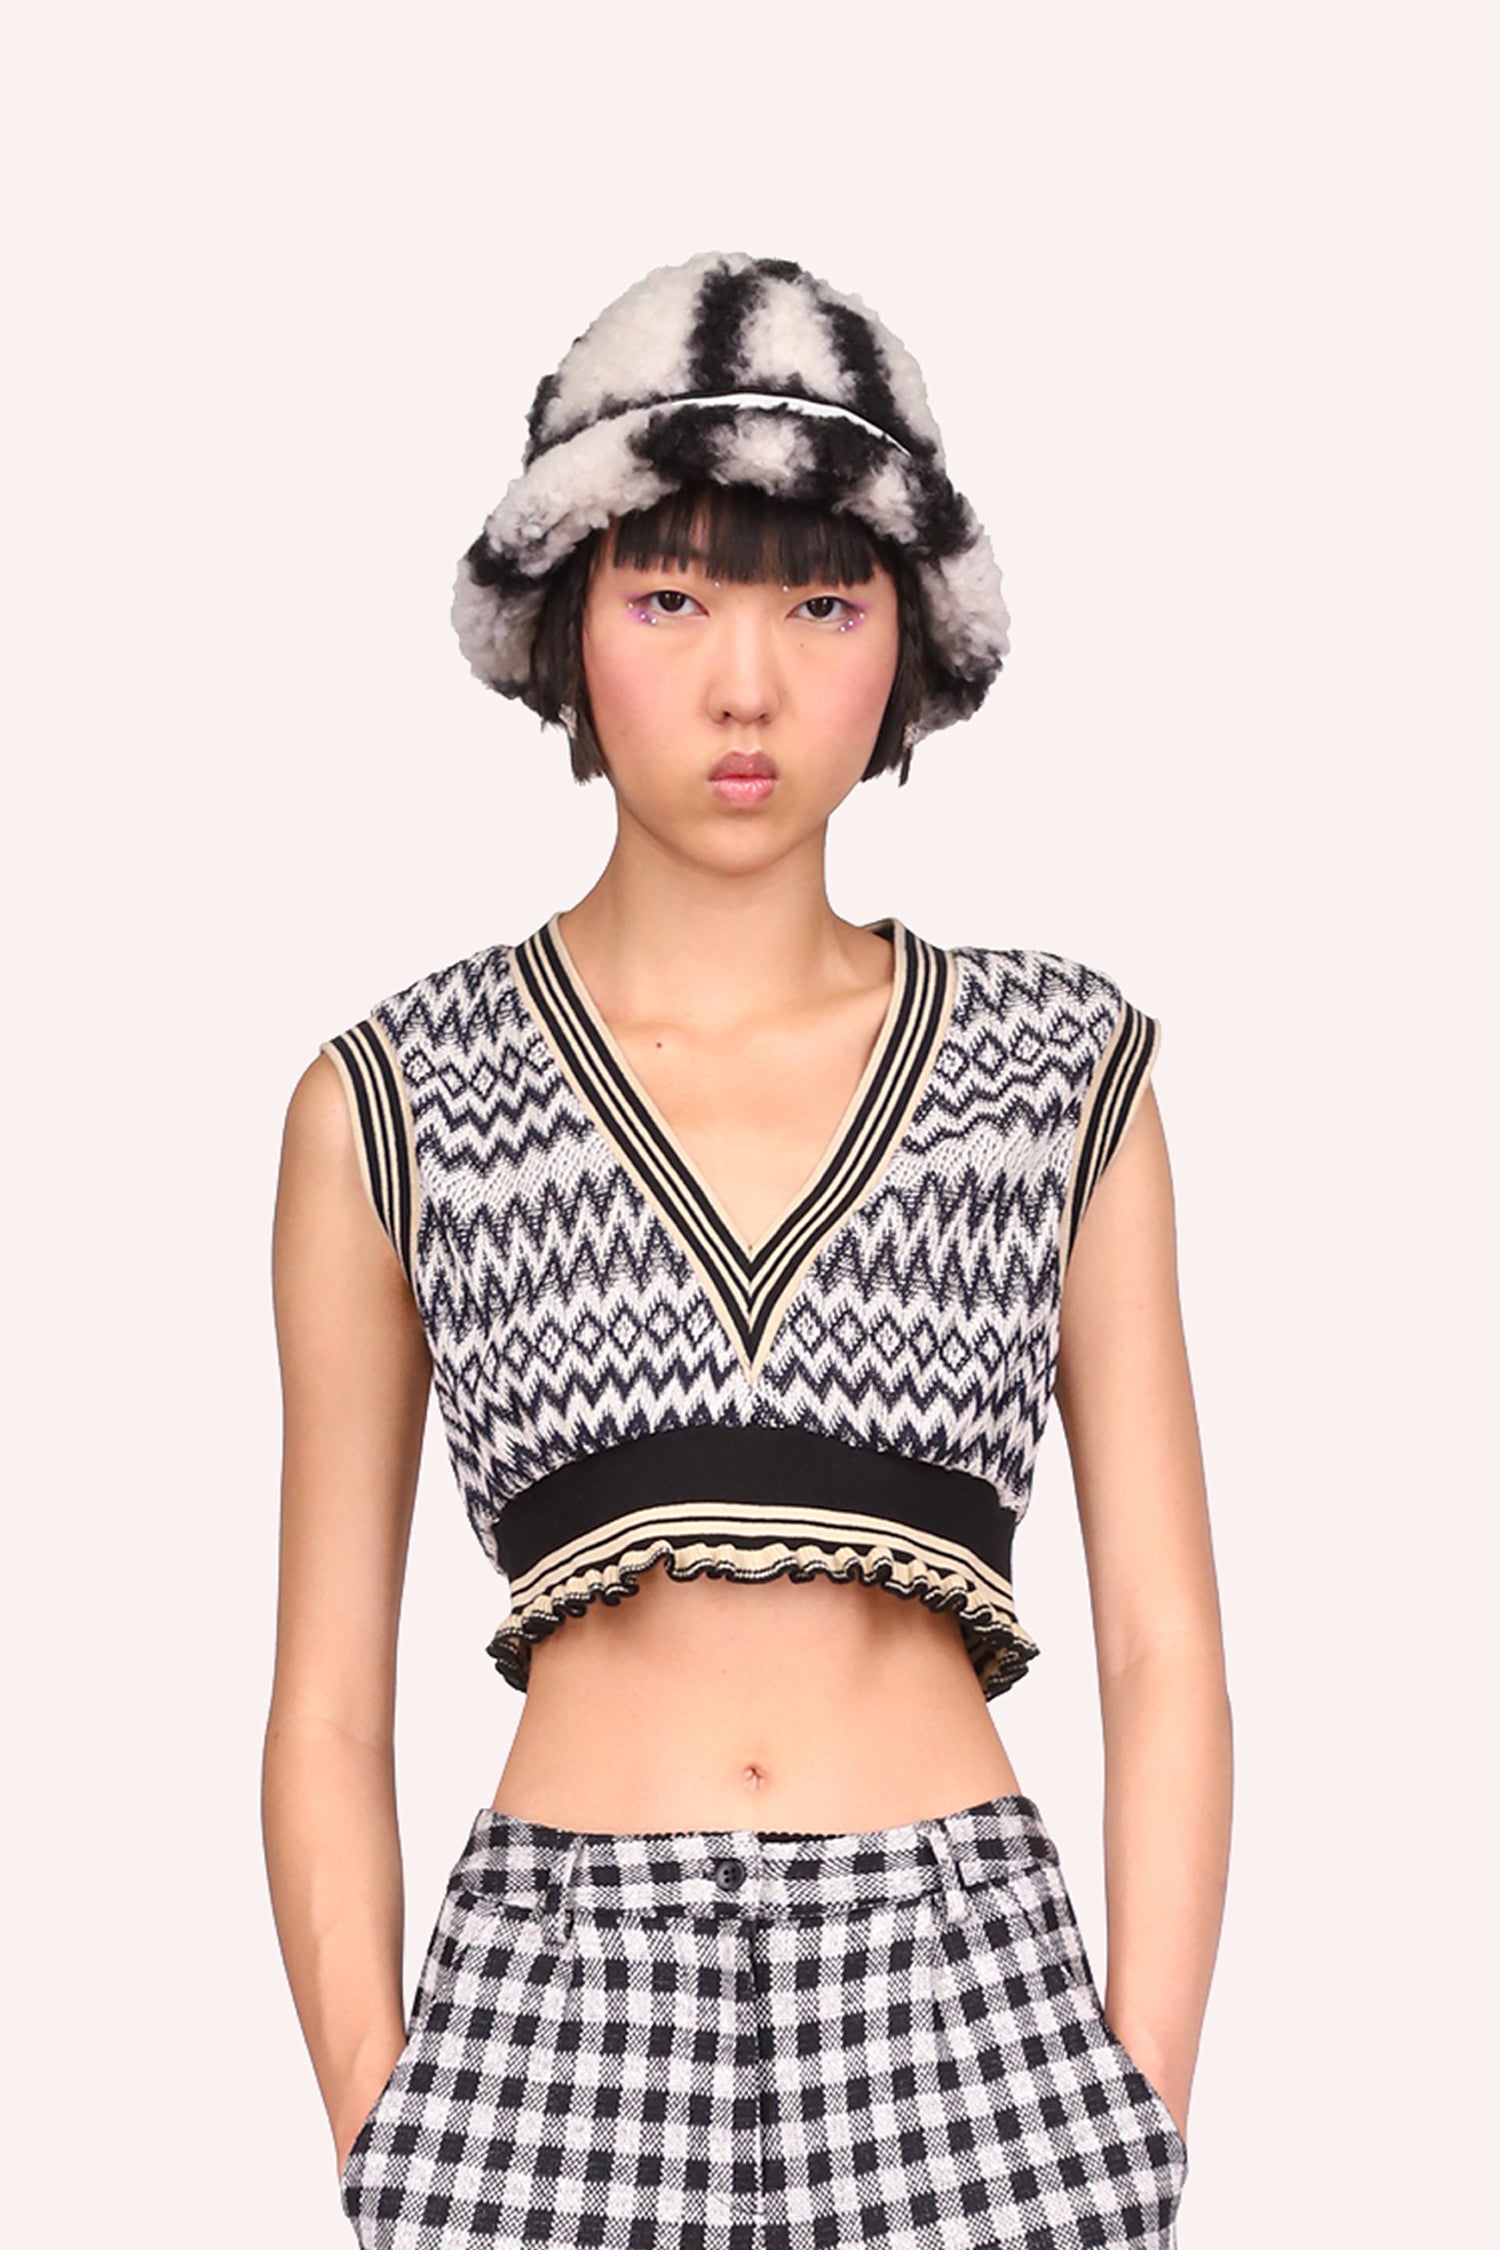 Sleeveless Vest,  under bust long, deep V-Cut collar, pattern of horizontal zigzag lines in black on white background